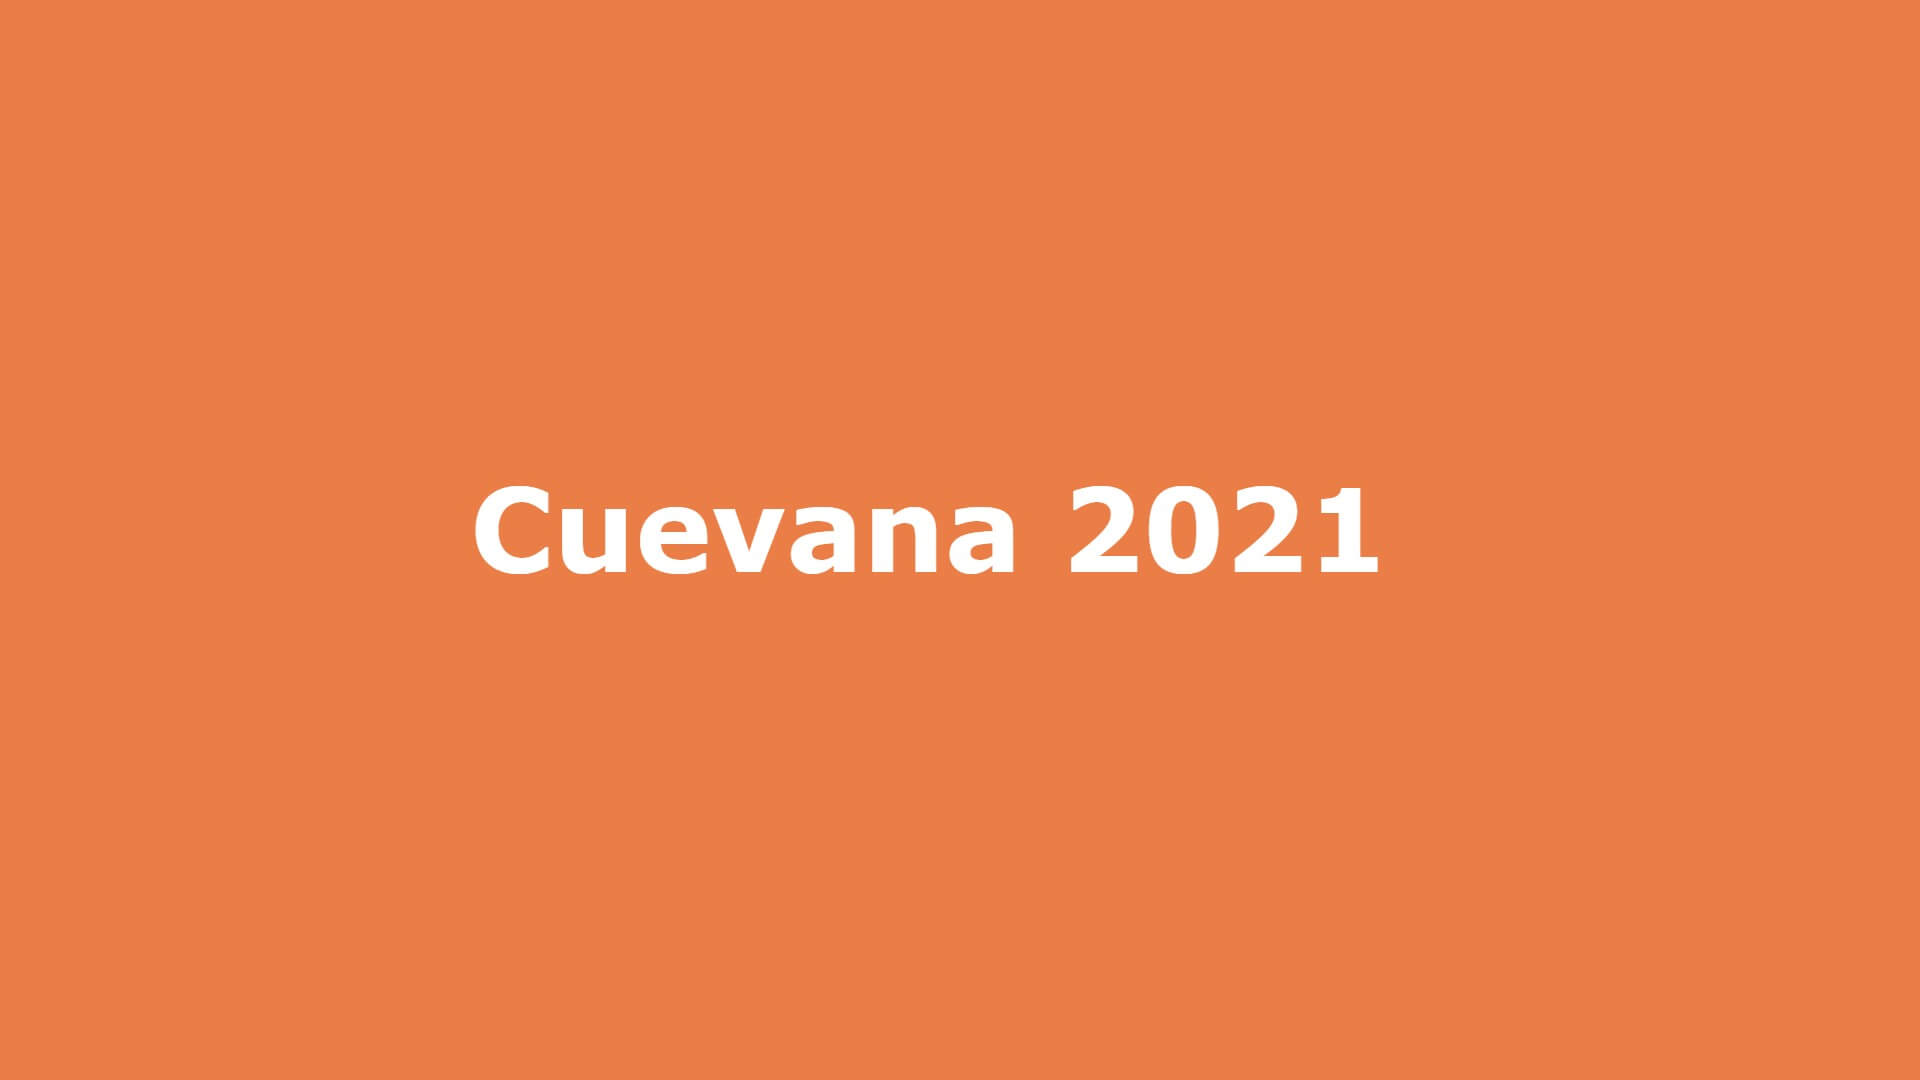 What If Cuevana 2021 - (Aug) Get Exciting News!